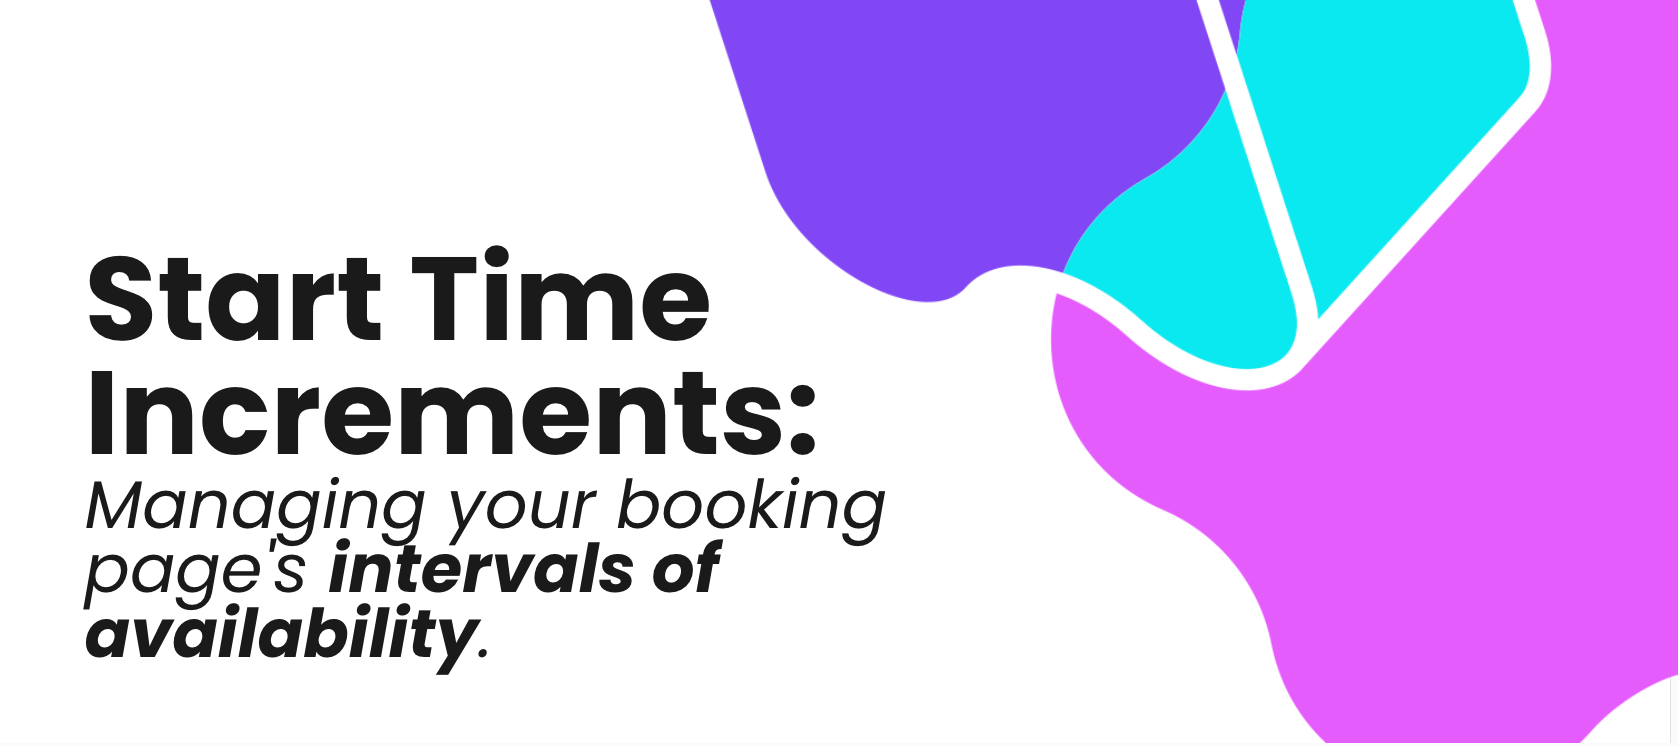 Start Time Increments: Managing your booking page's intervals of availability.